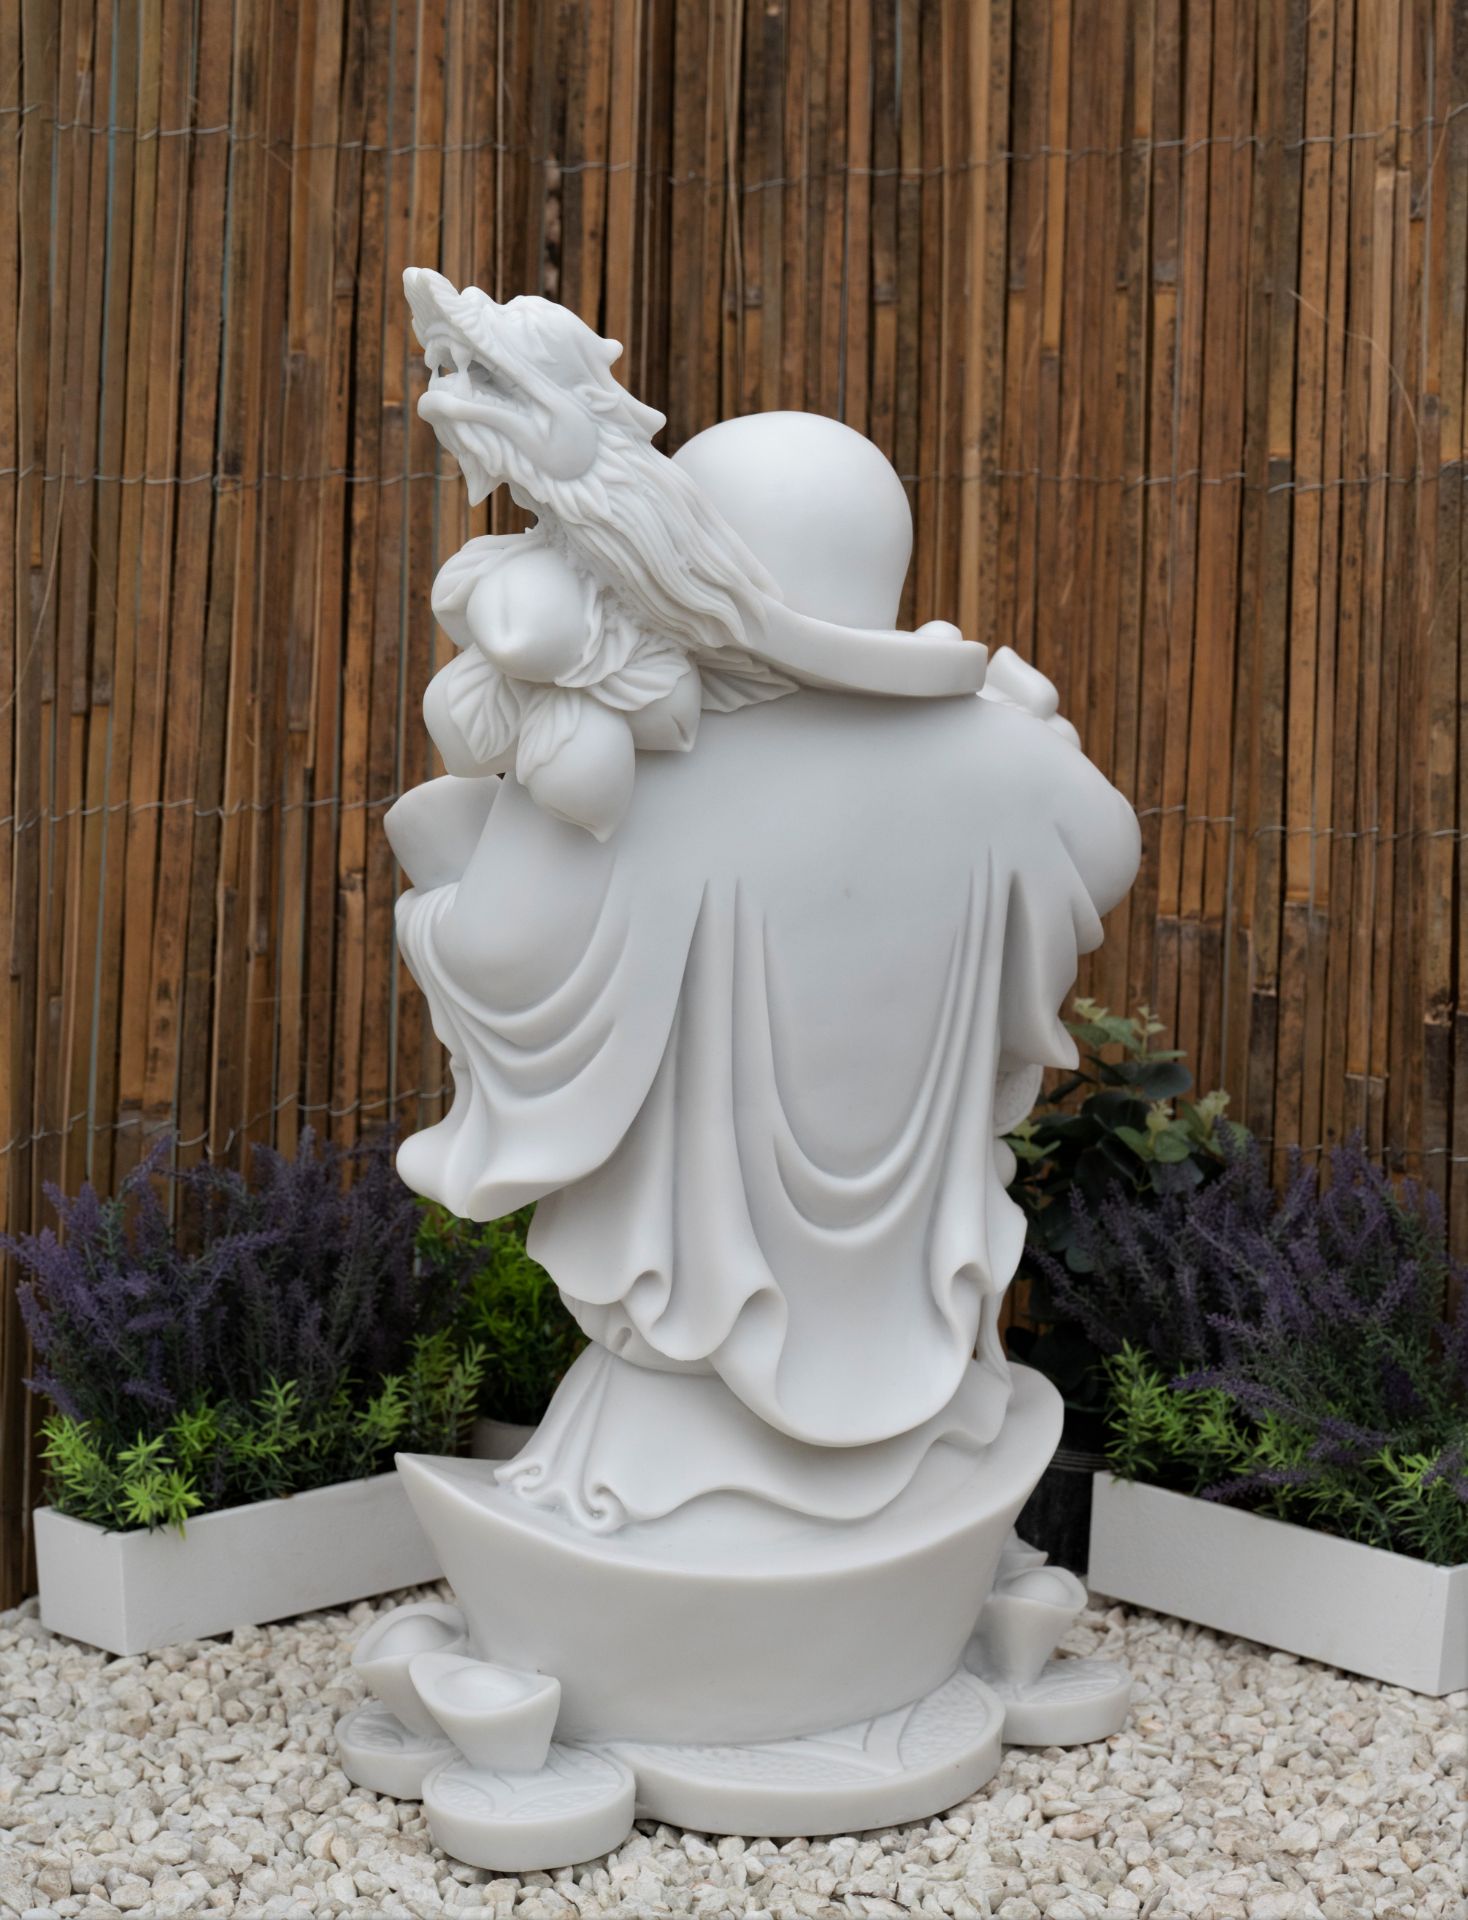 GORGEOUS TERRAZO MARBLE WEALTHY STANDING BUDDHA GARDEN STATUE - Image 8 of 8